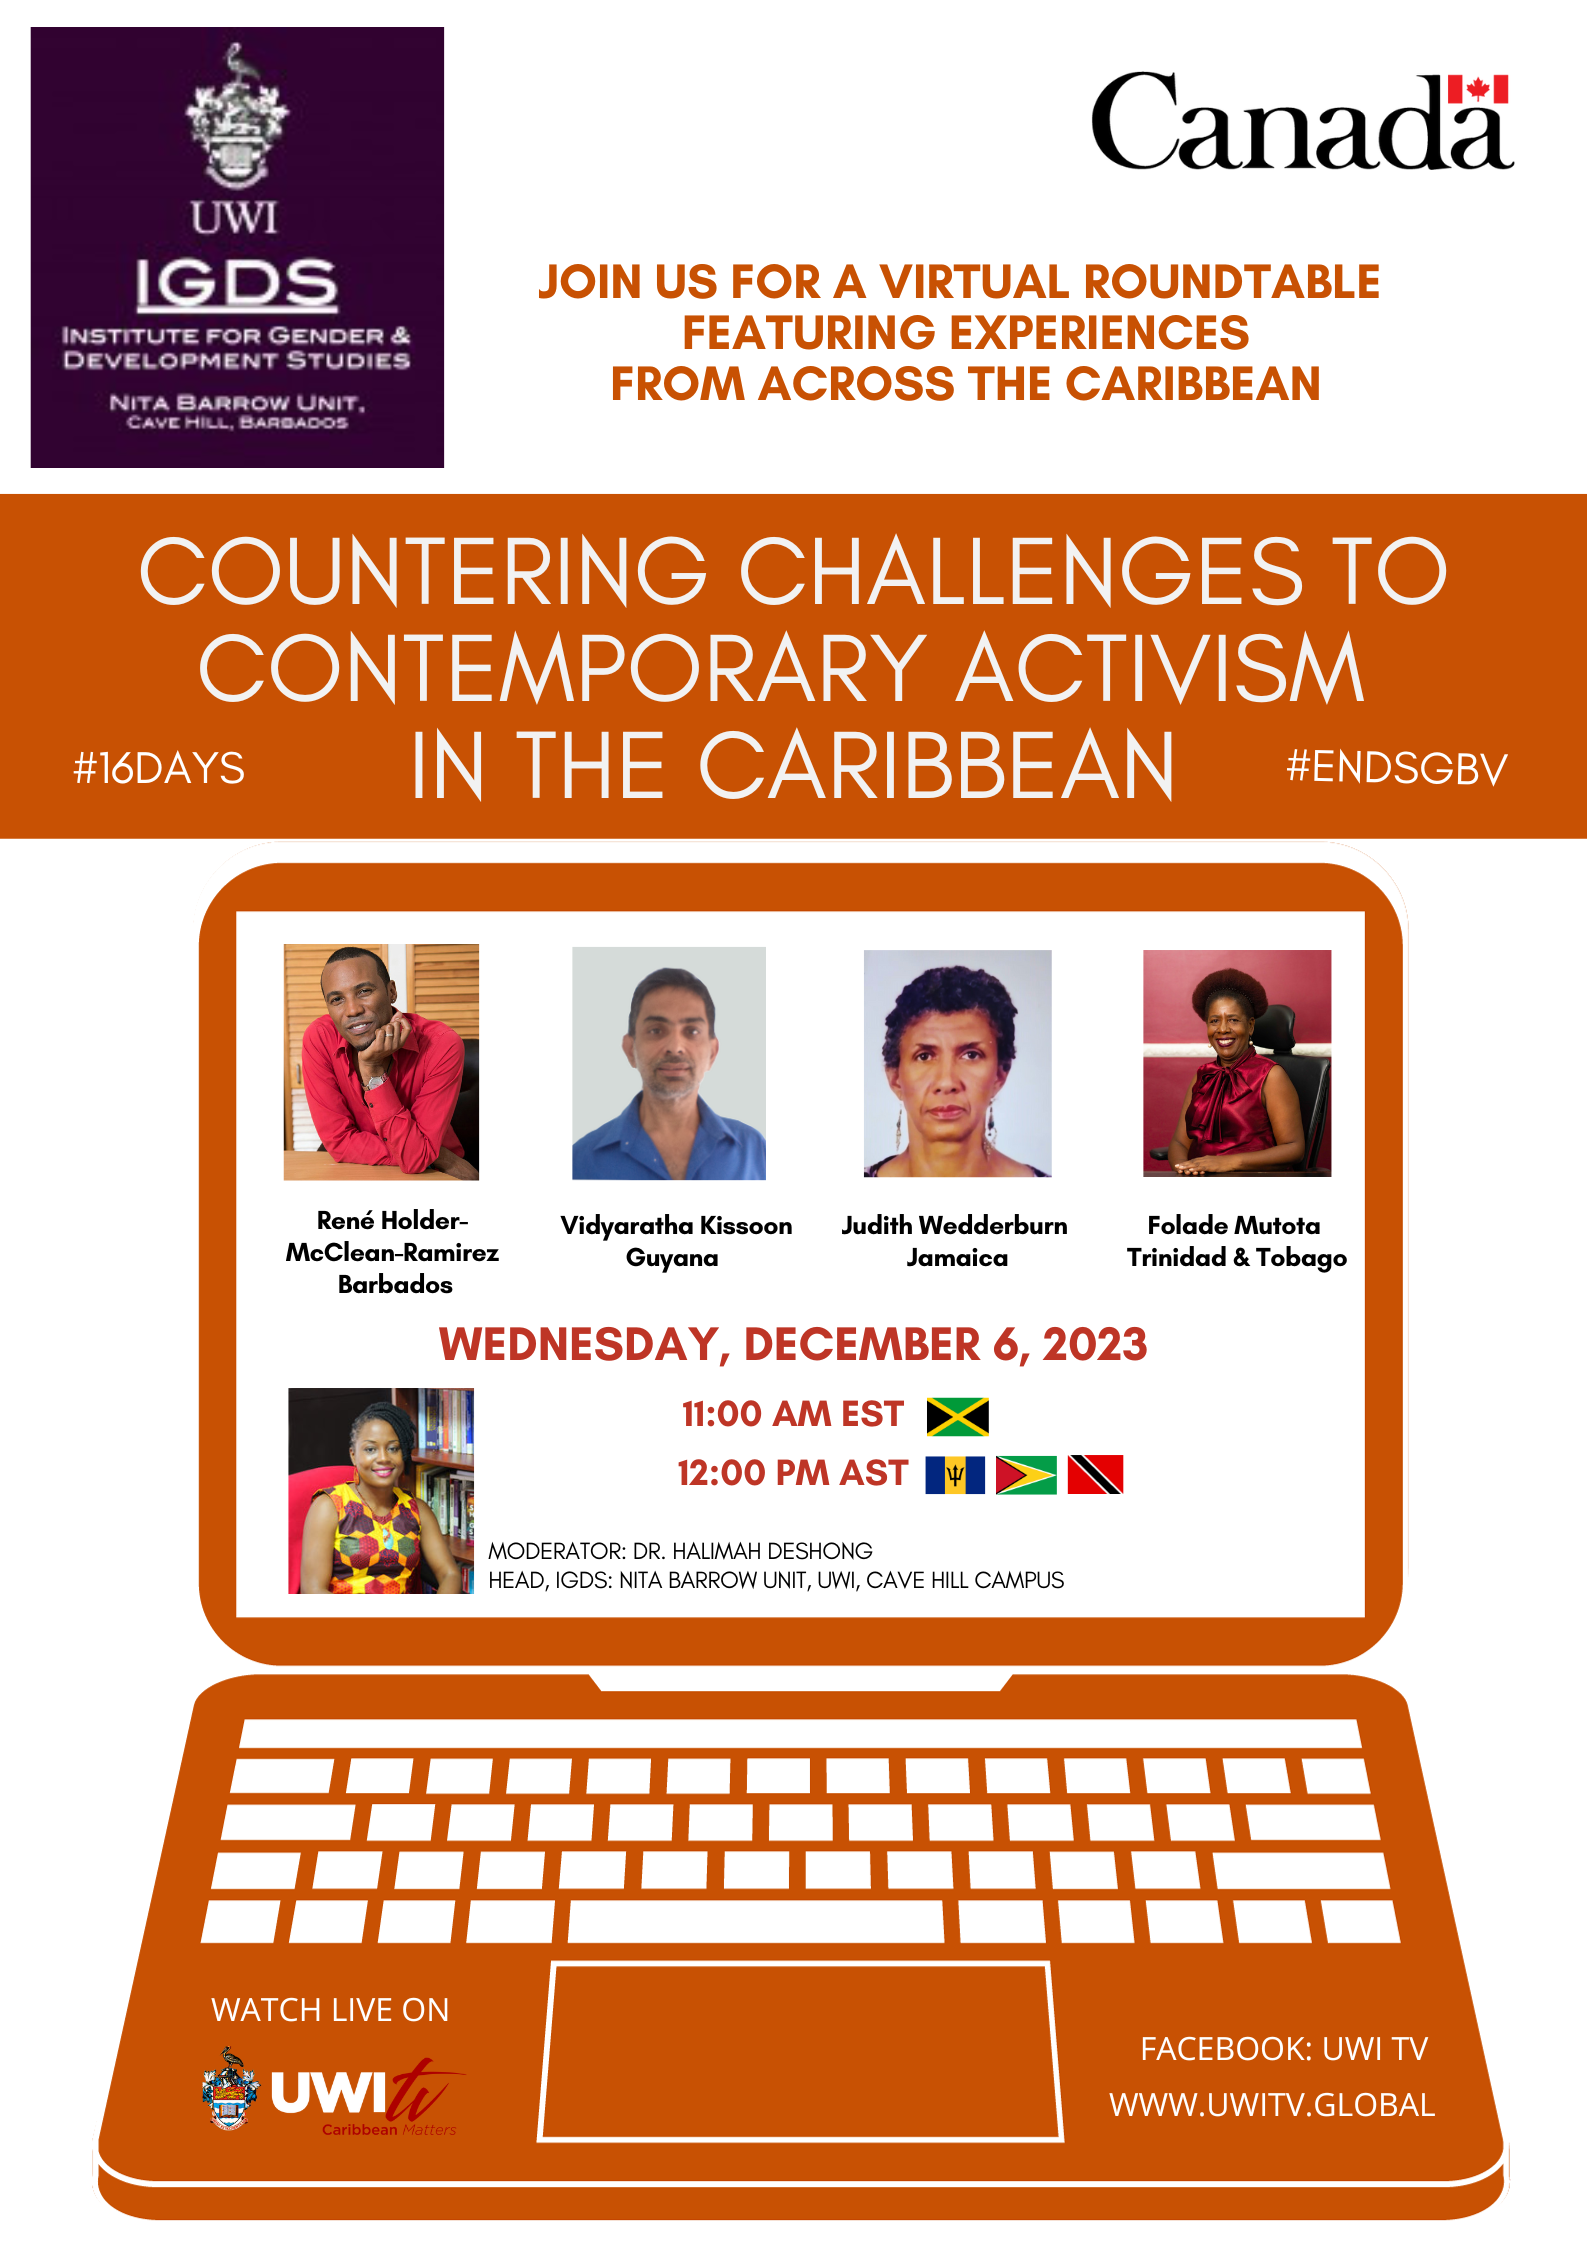 Countering Challenges to Contemporary Activism in the Caribbean